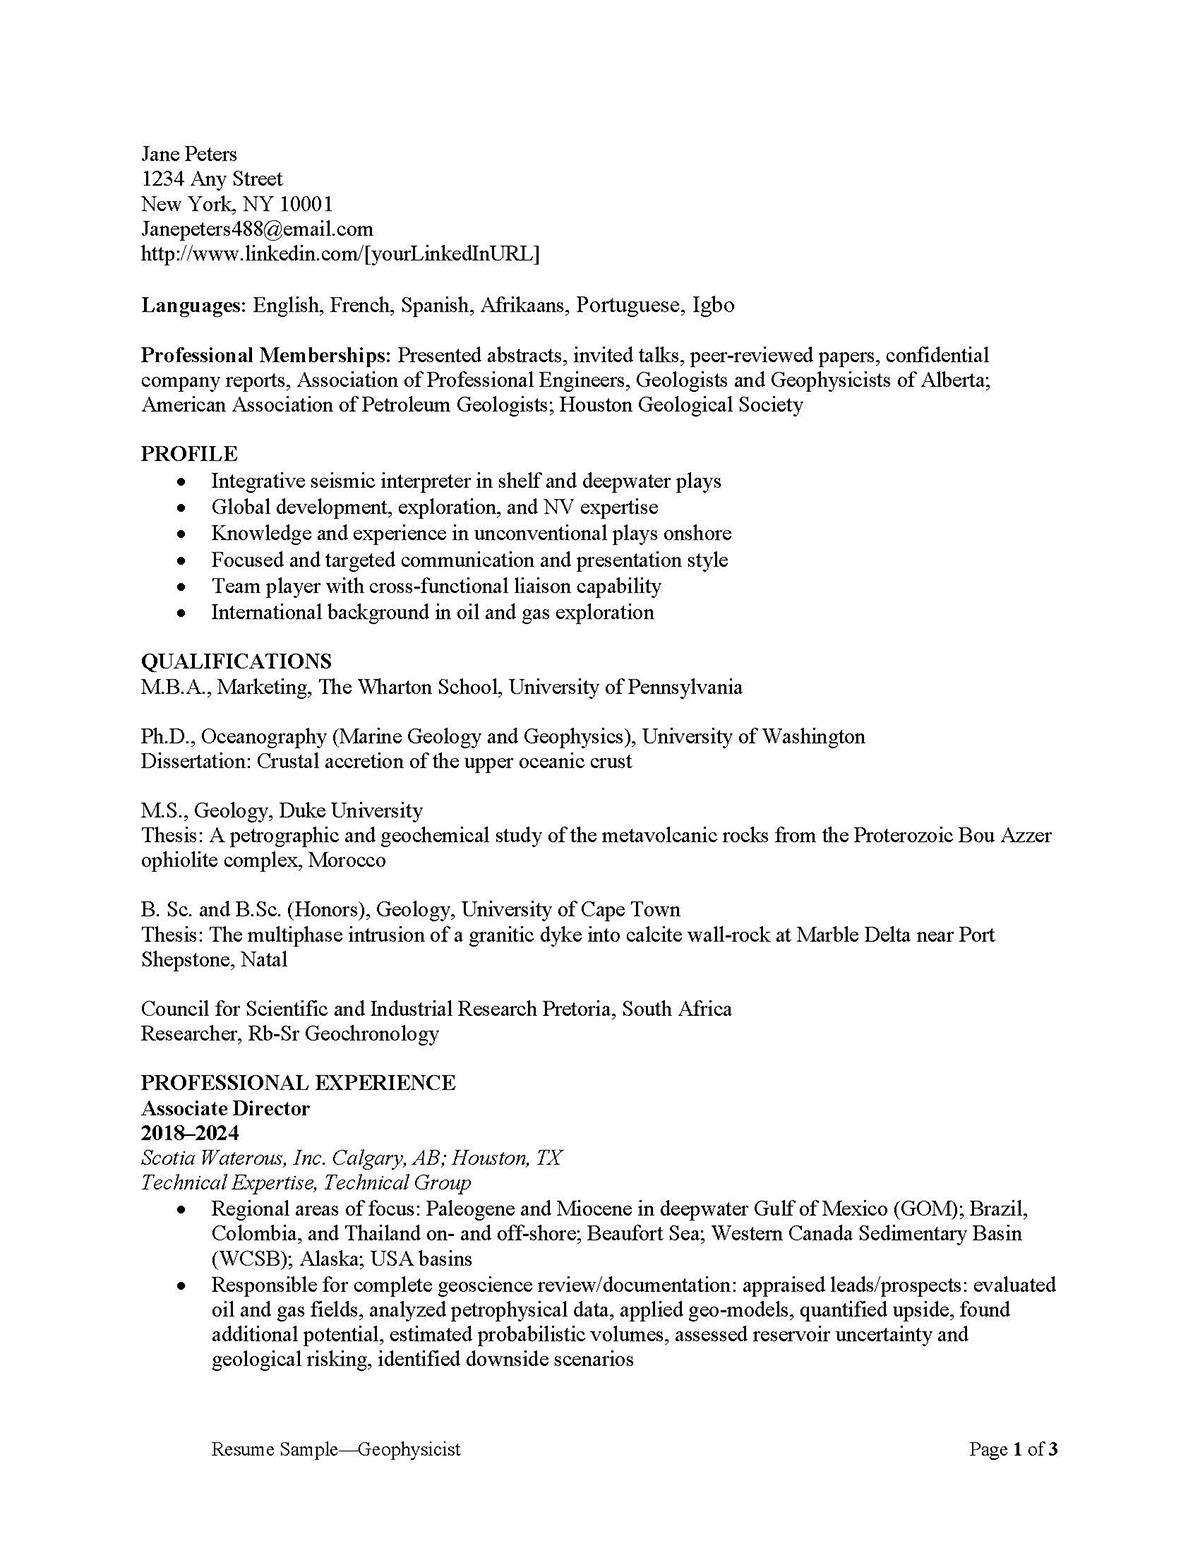 Sample resume: Energy, High Experience, Combination